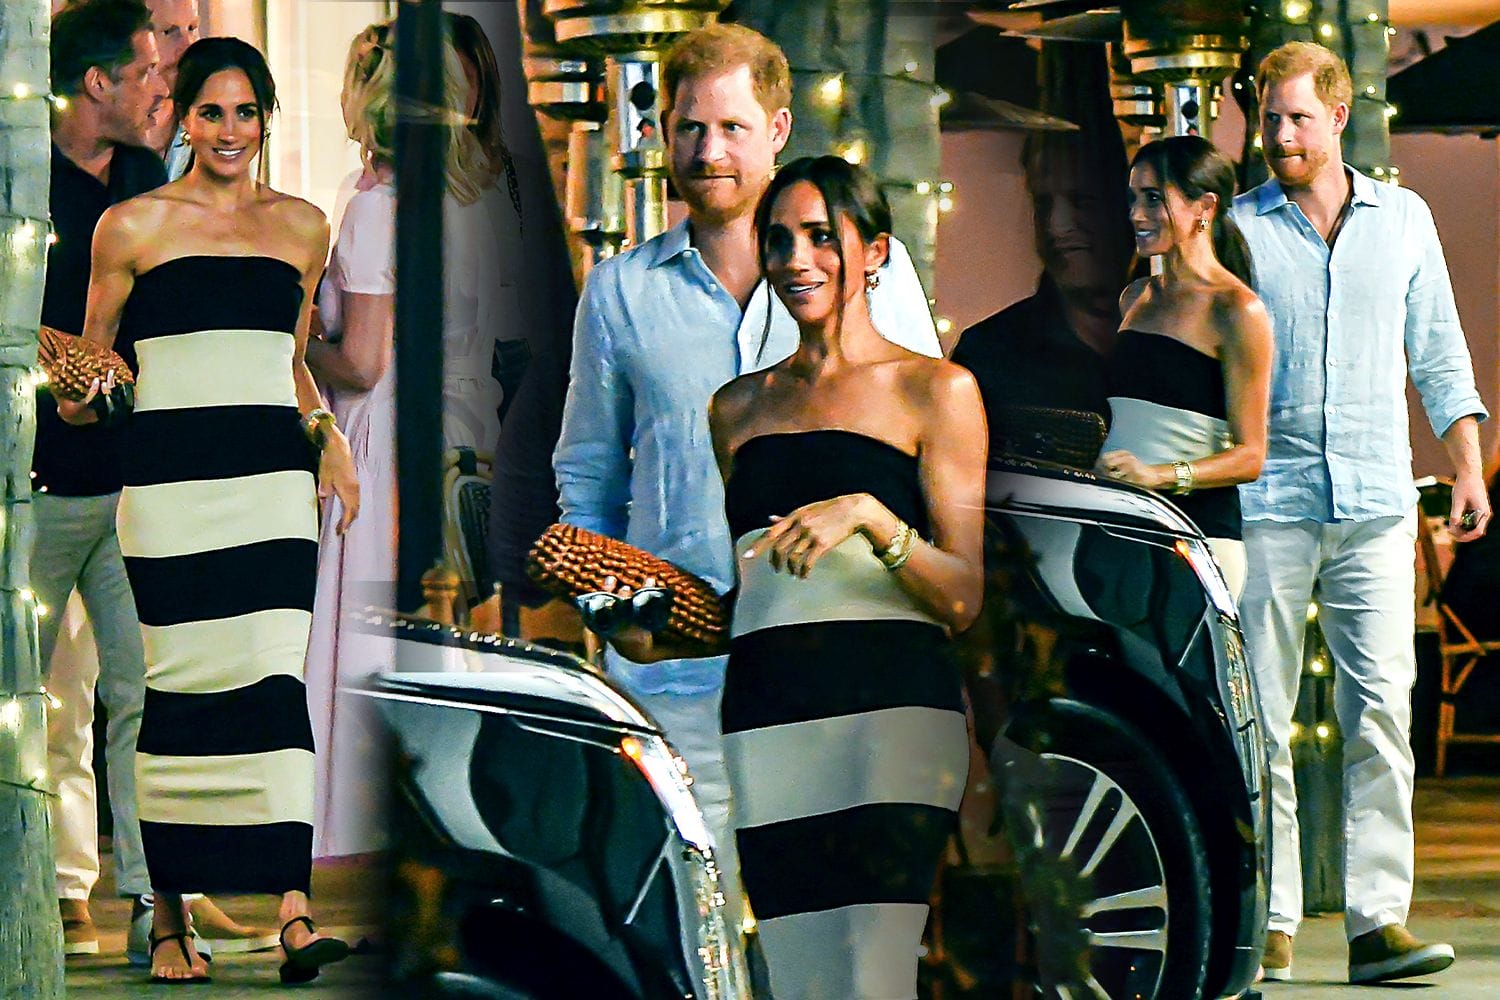 Meghan Markle beams at birthday dinner with Prince Harry after Royals publicly ignore her big day